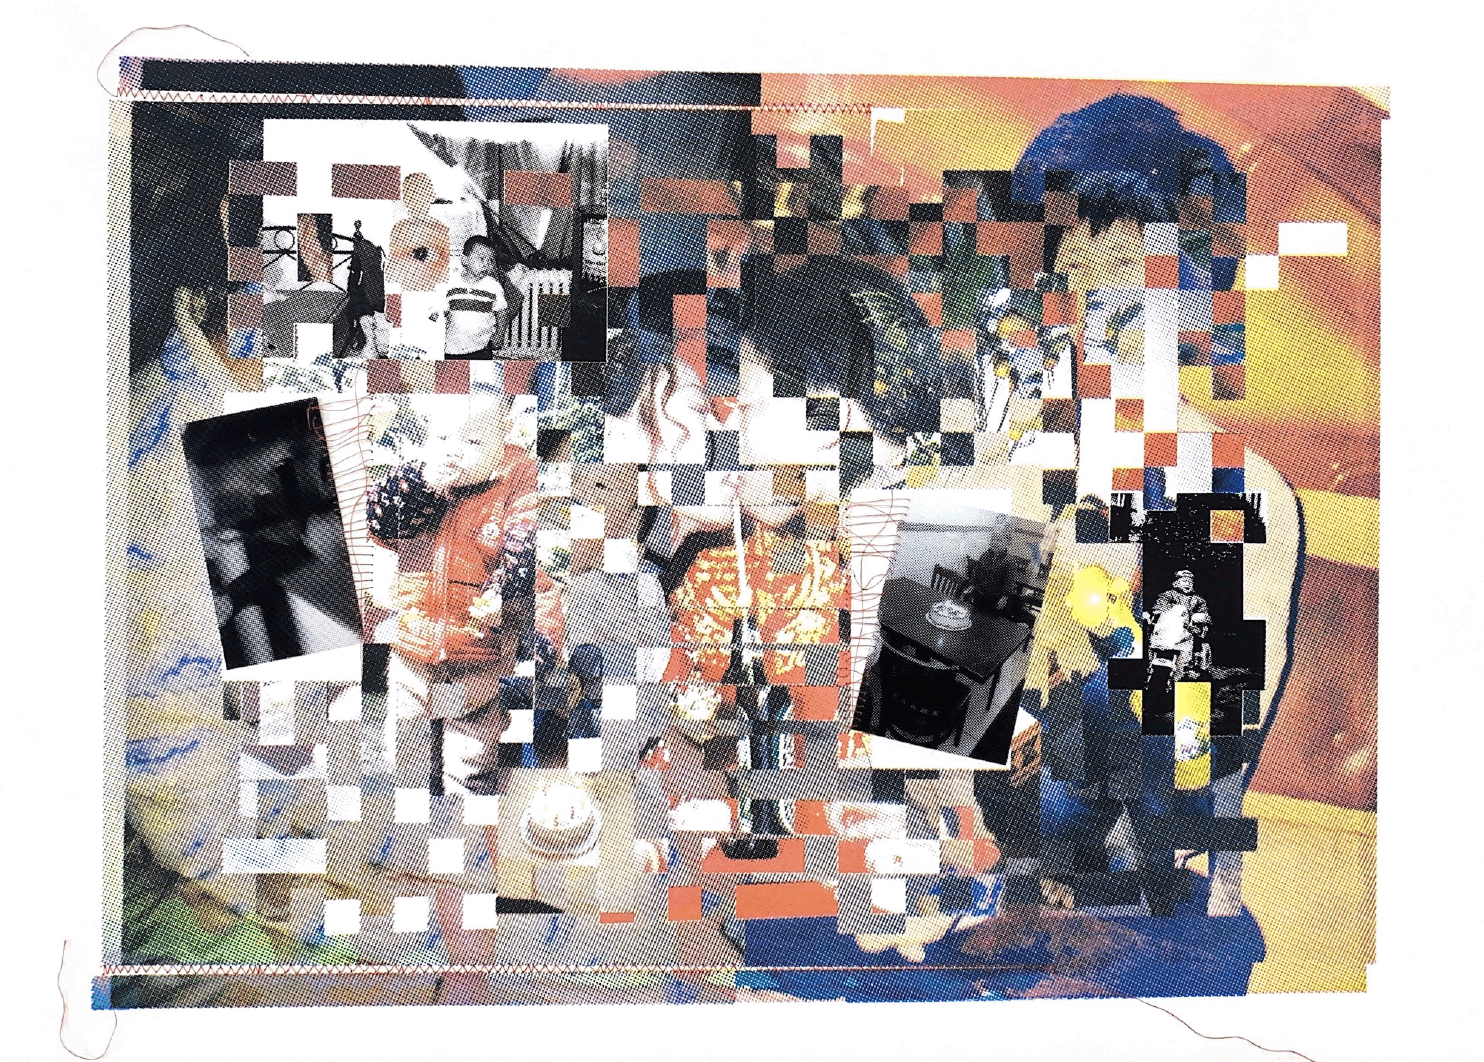 A collage of fragmented and halftoned images made into animated artwork. Pieces of family photographs, colorful patterns, and objects like a Heineken beer, are interwoven, and red thread is handsown to attach acetate film photos.